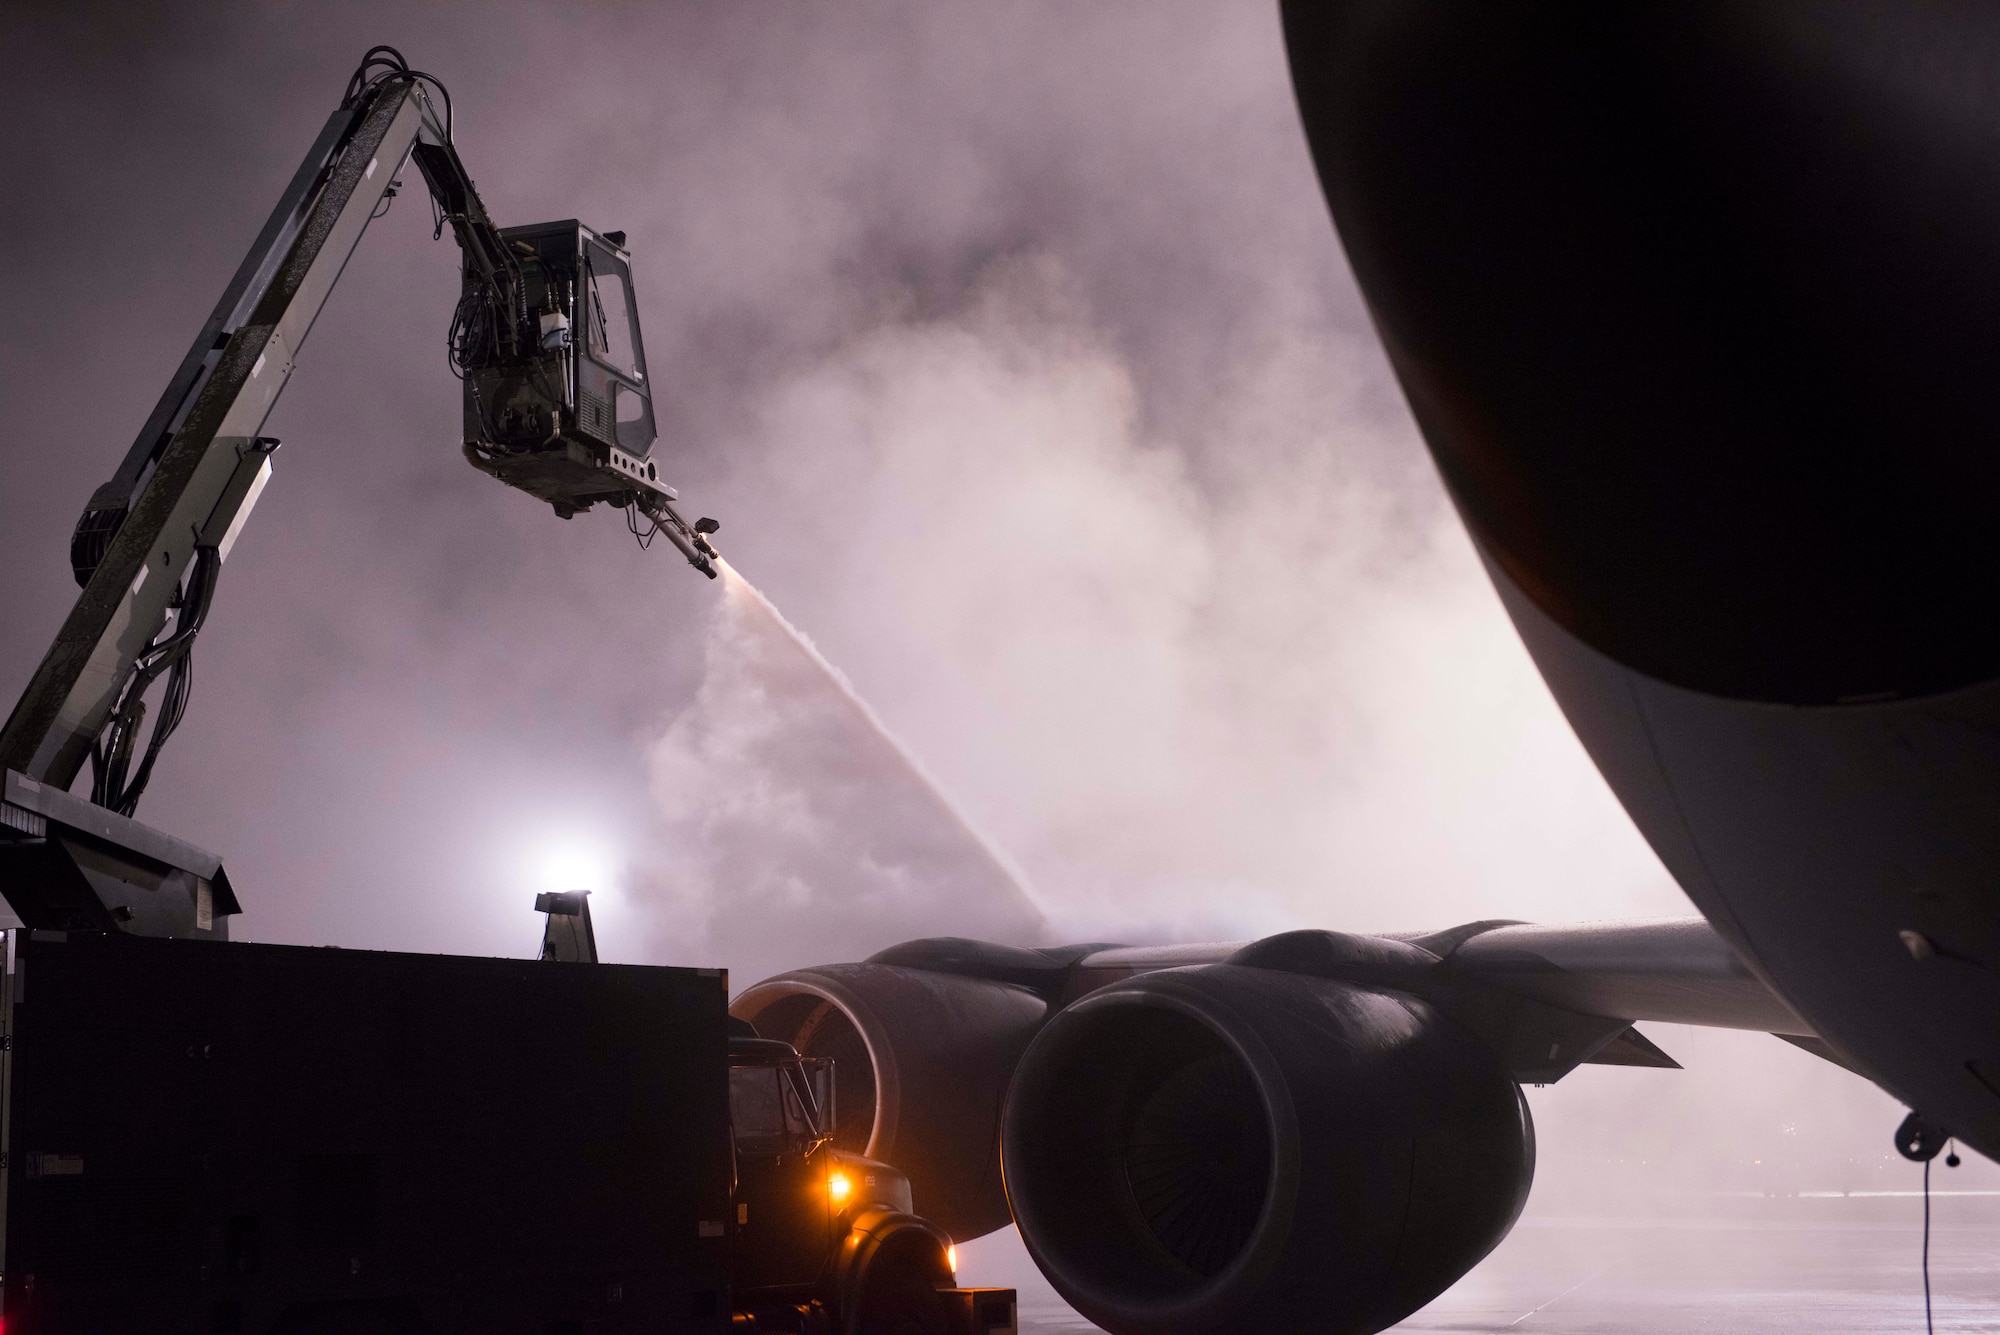 Maintainers from the 92nd Maintenance Group use specialized equipment to de-ice a KC-135 Stratotanker during Exercise Global Thunder 2018 at Fairchild Air Force Base, Washington, Nov. 4, 2017. Global Thunder is an annual U.S. Strategic Command (USSTRATCOM) exercise designed to provide training opportunities to test and validate command, control and operational procedures. The training is based on a notional scenario developed to drive execution of USSTRATCOM and component forces’ ability to support the geographic combatant commands, deter adversaries and, if necessary, employ forces as directed by the President of the United States. (U.S. Air Force photo/Senior Airman Ryan Lackey)